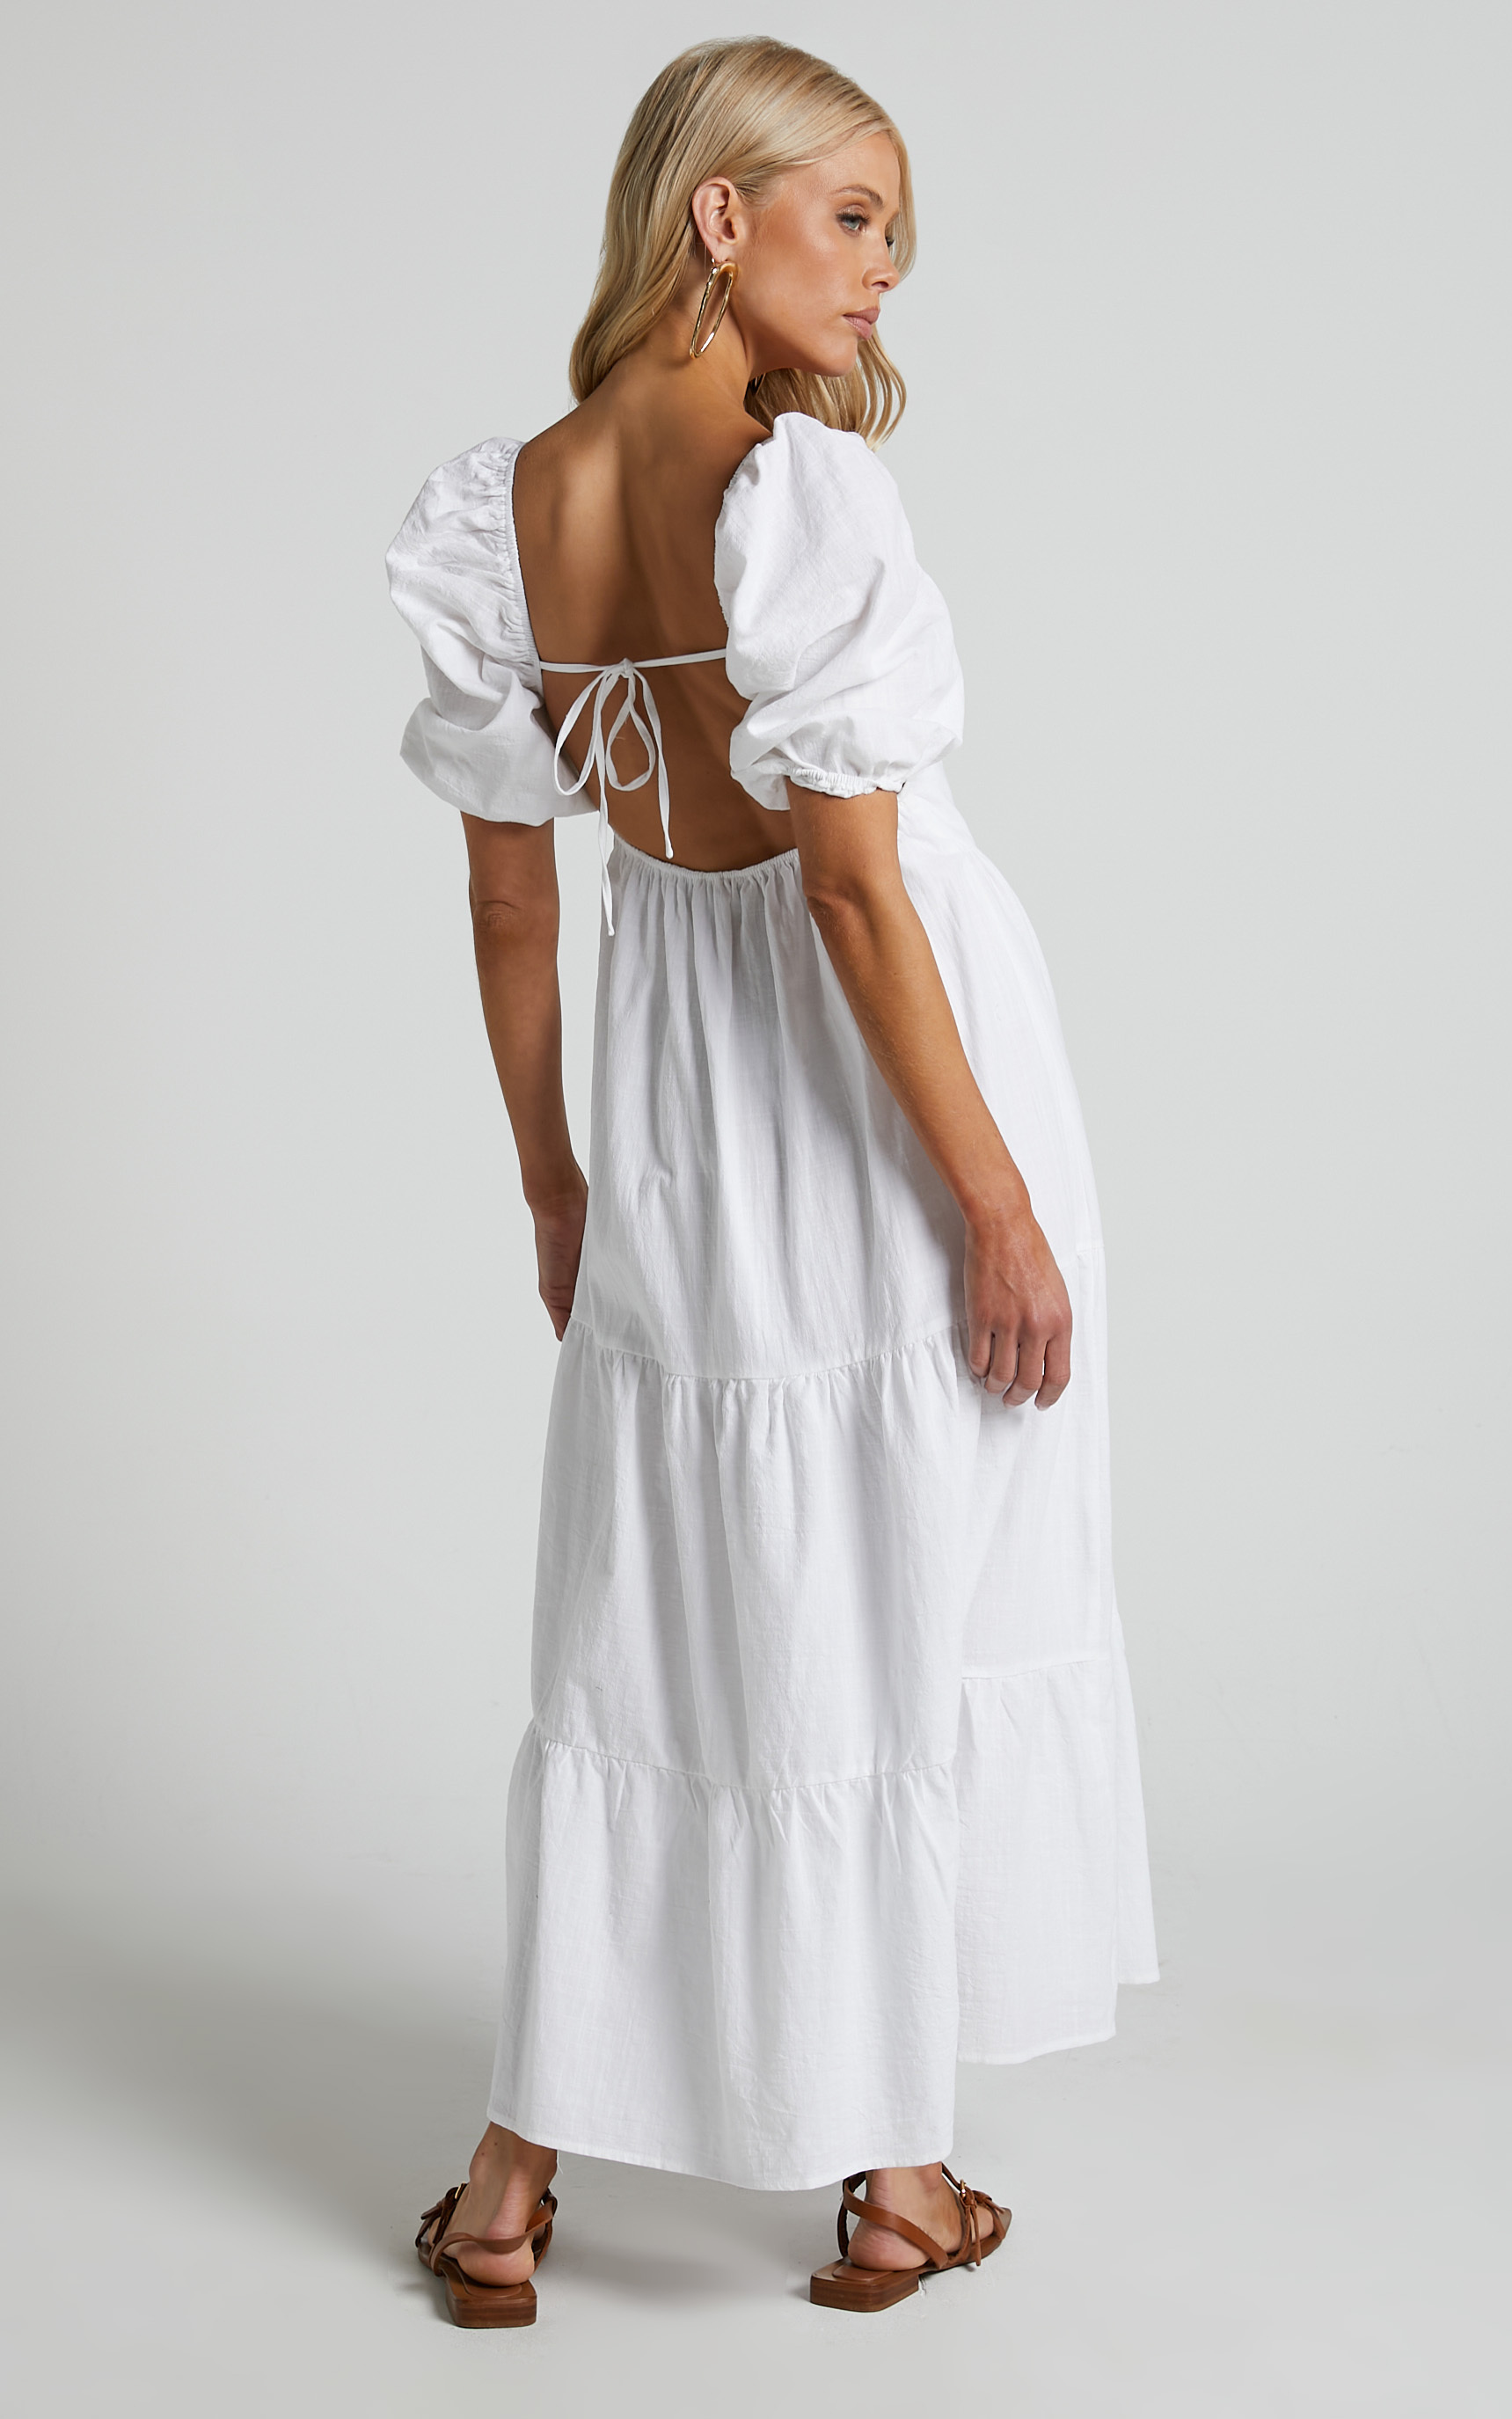 Palmer Dress in White - 06, WHT1, hi-res image number null